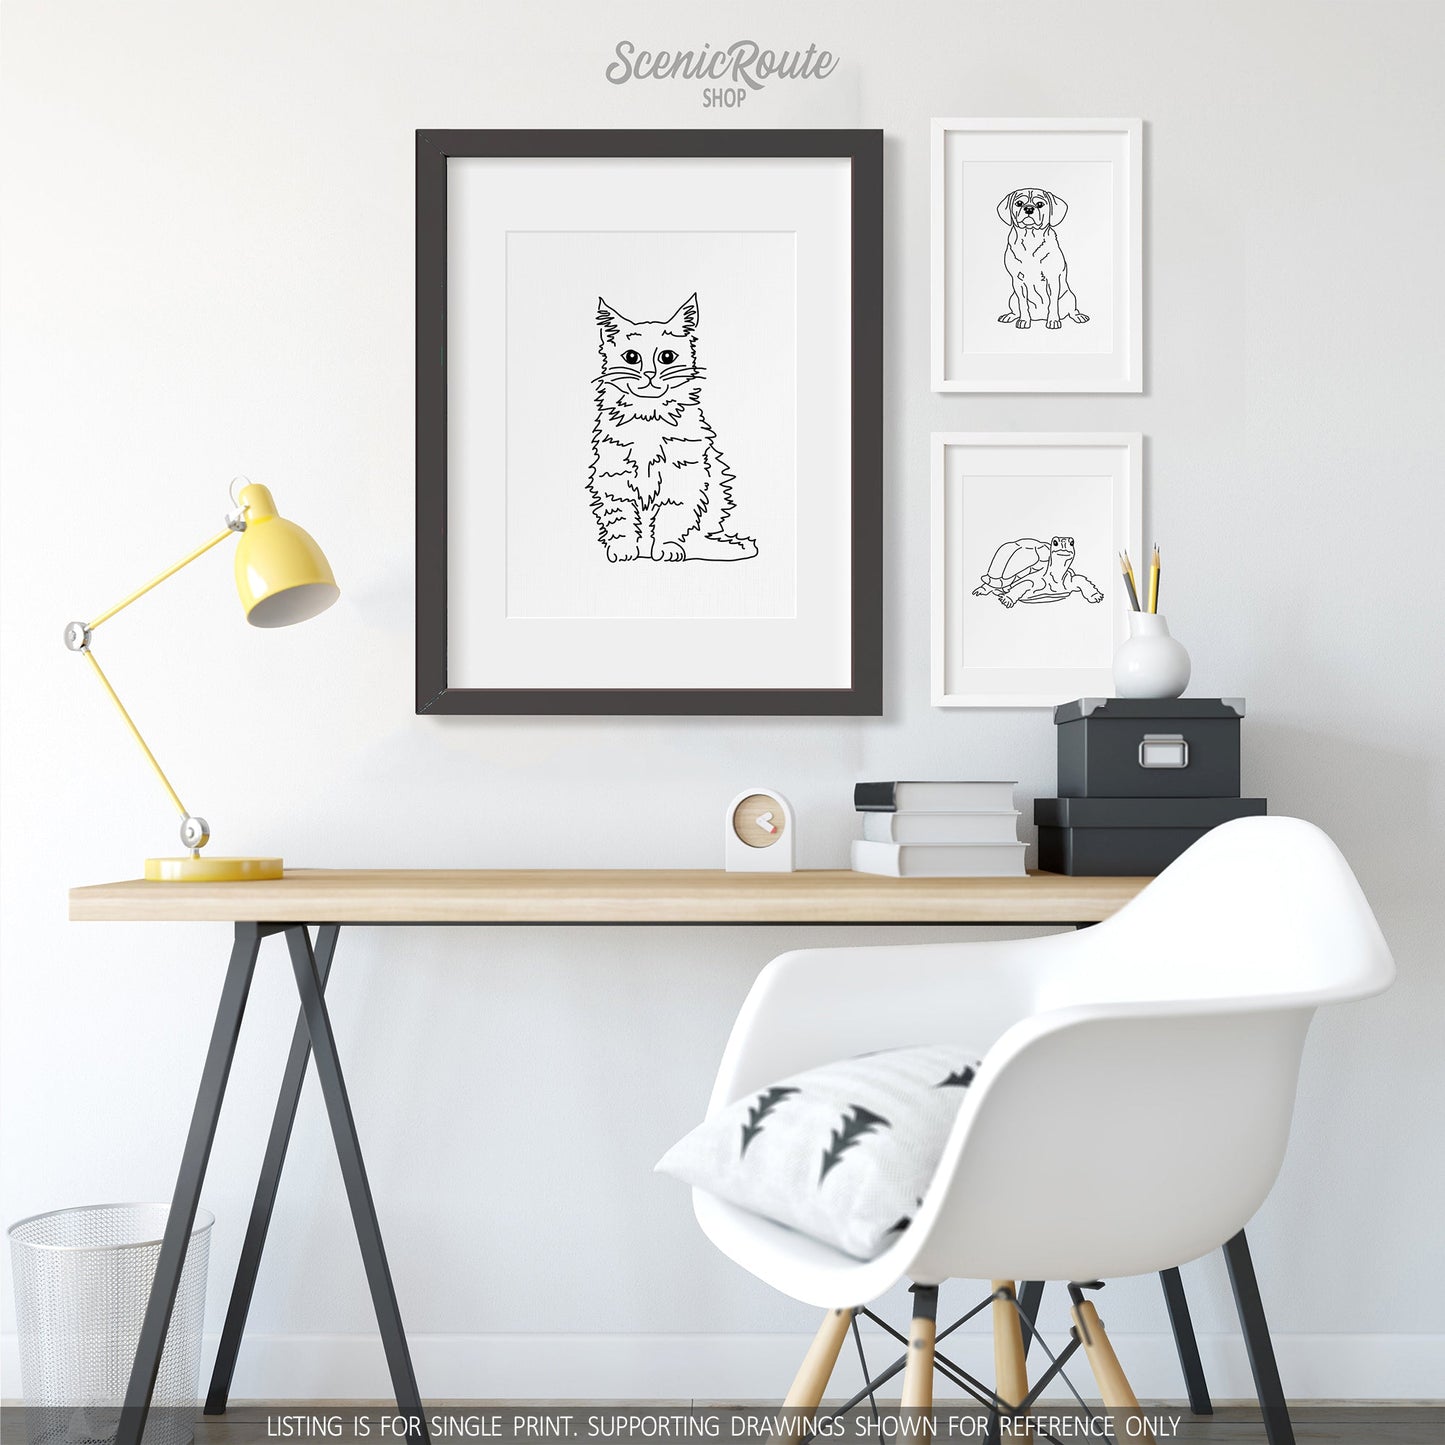 A group of three framed drawings on a wall above a desk. The line art drawings include a Maine Coon cat, a Puggle dog, and a Tortoise